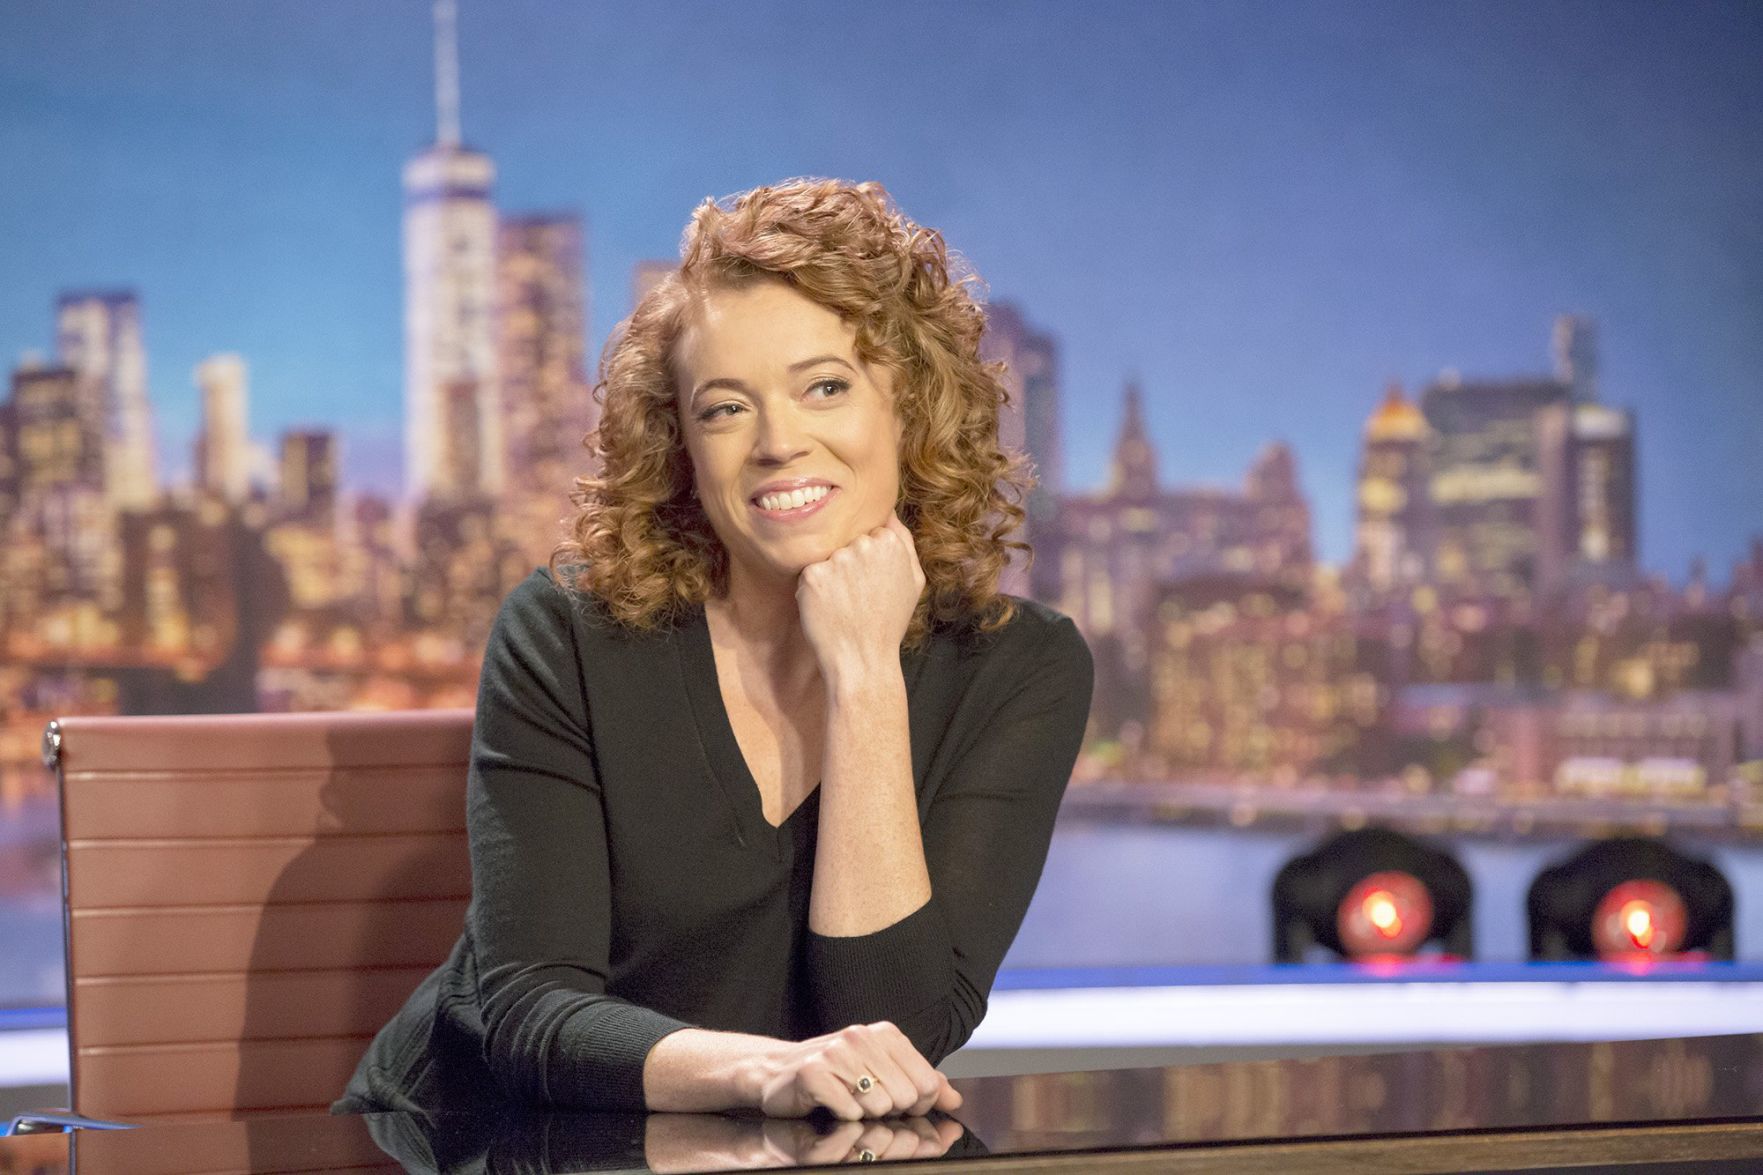 michelle wolf comedy